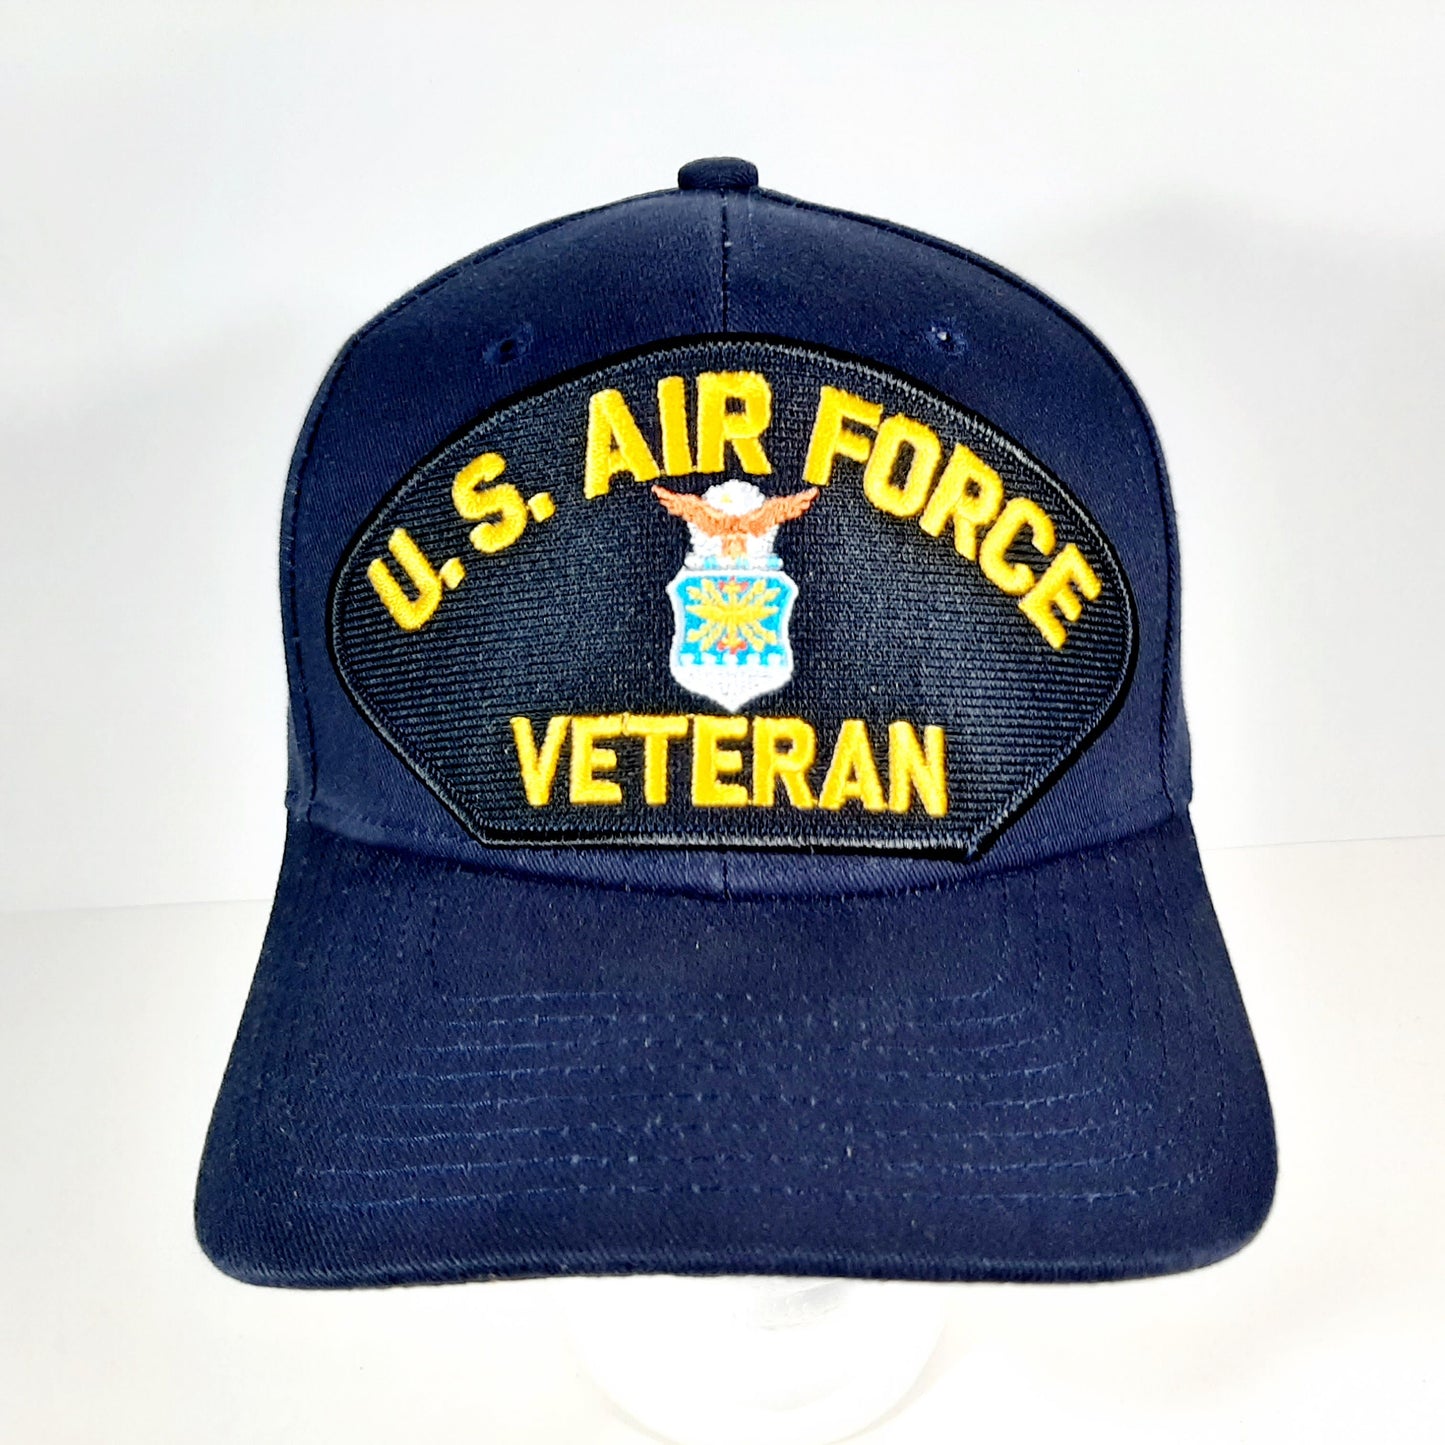 U.S. Air Force Veteran Embroidered Patch Hat Baseball Cap Adjustable Navy Blue